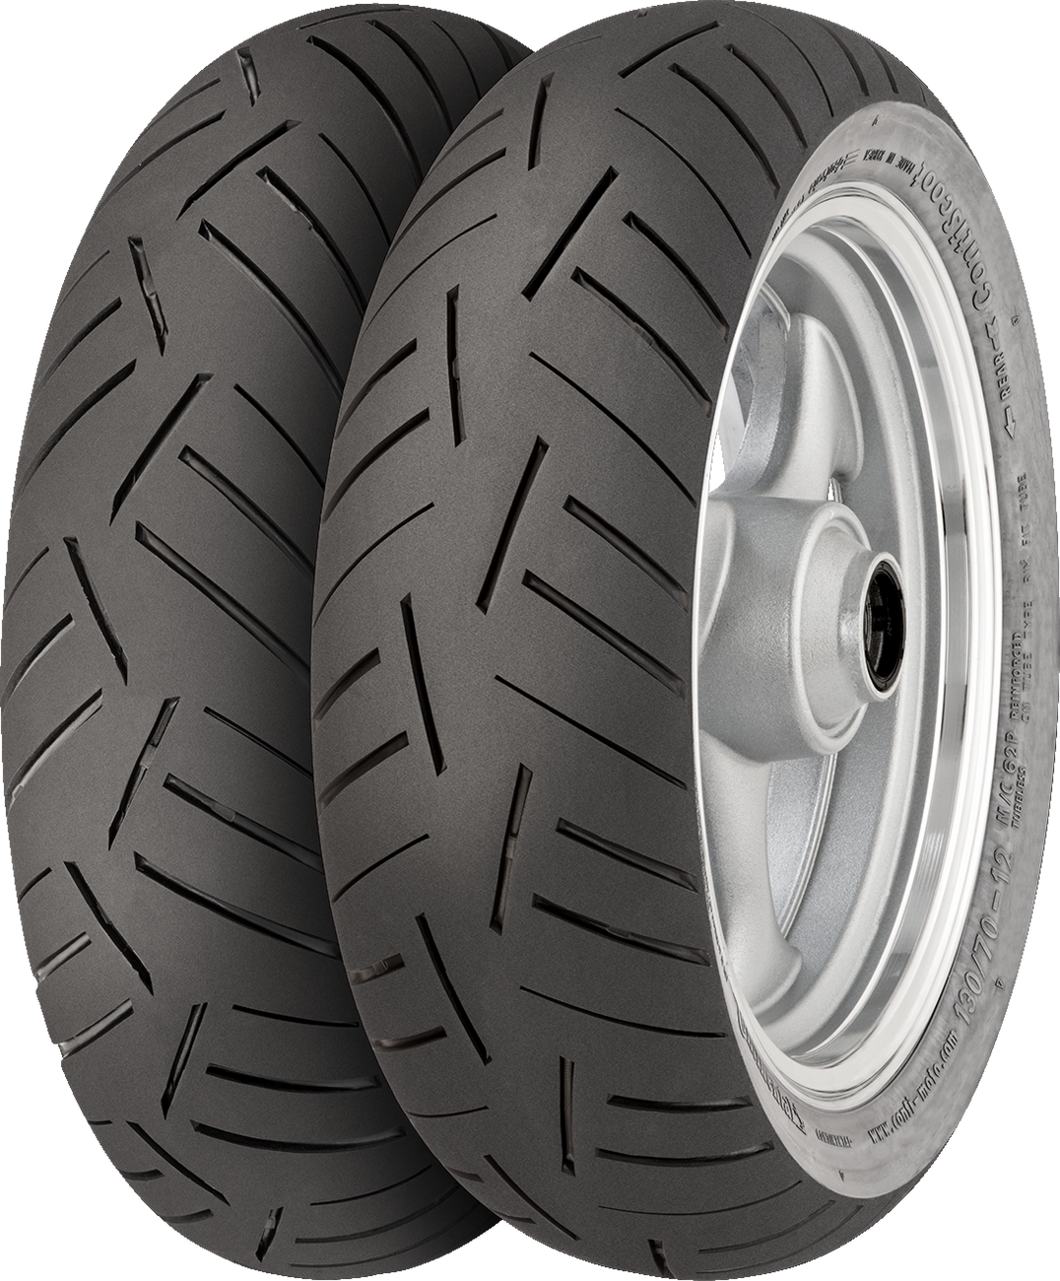 Tire - ContiScoot - Front/Rear - 120/70-12 - 58P